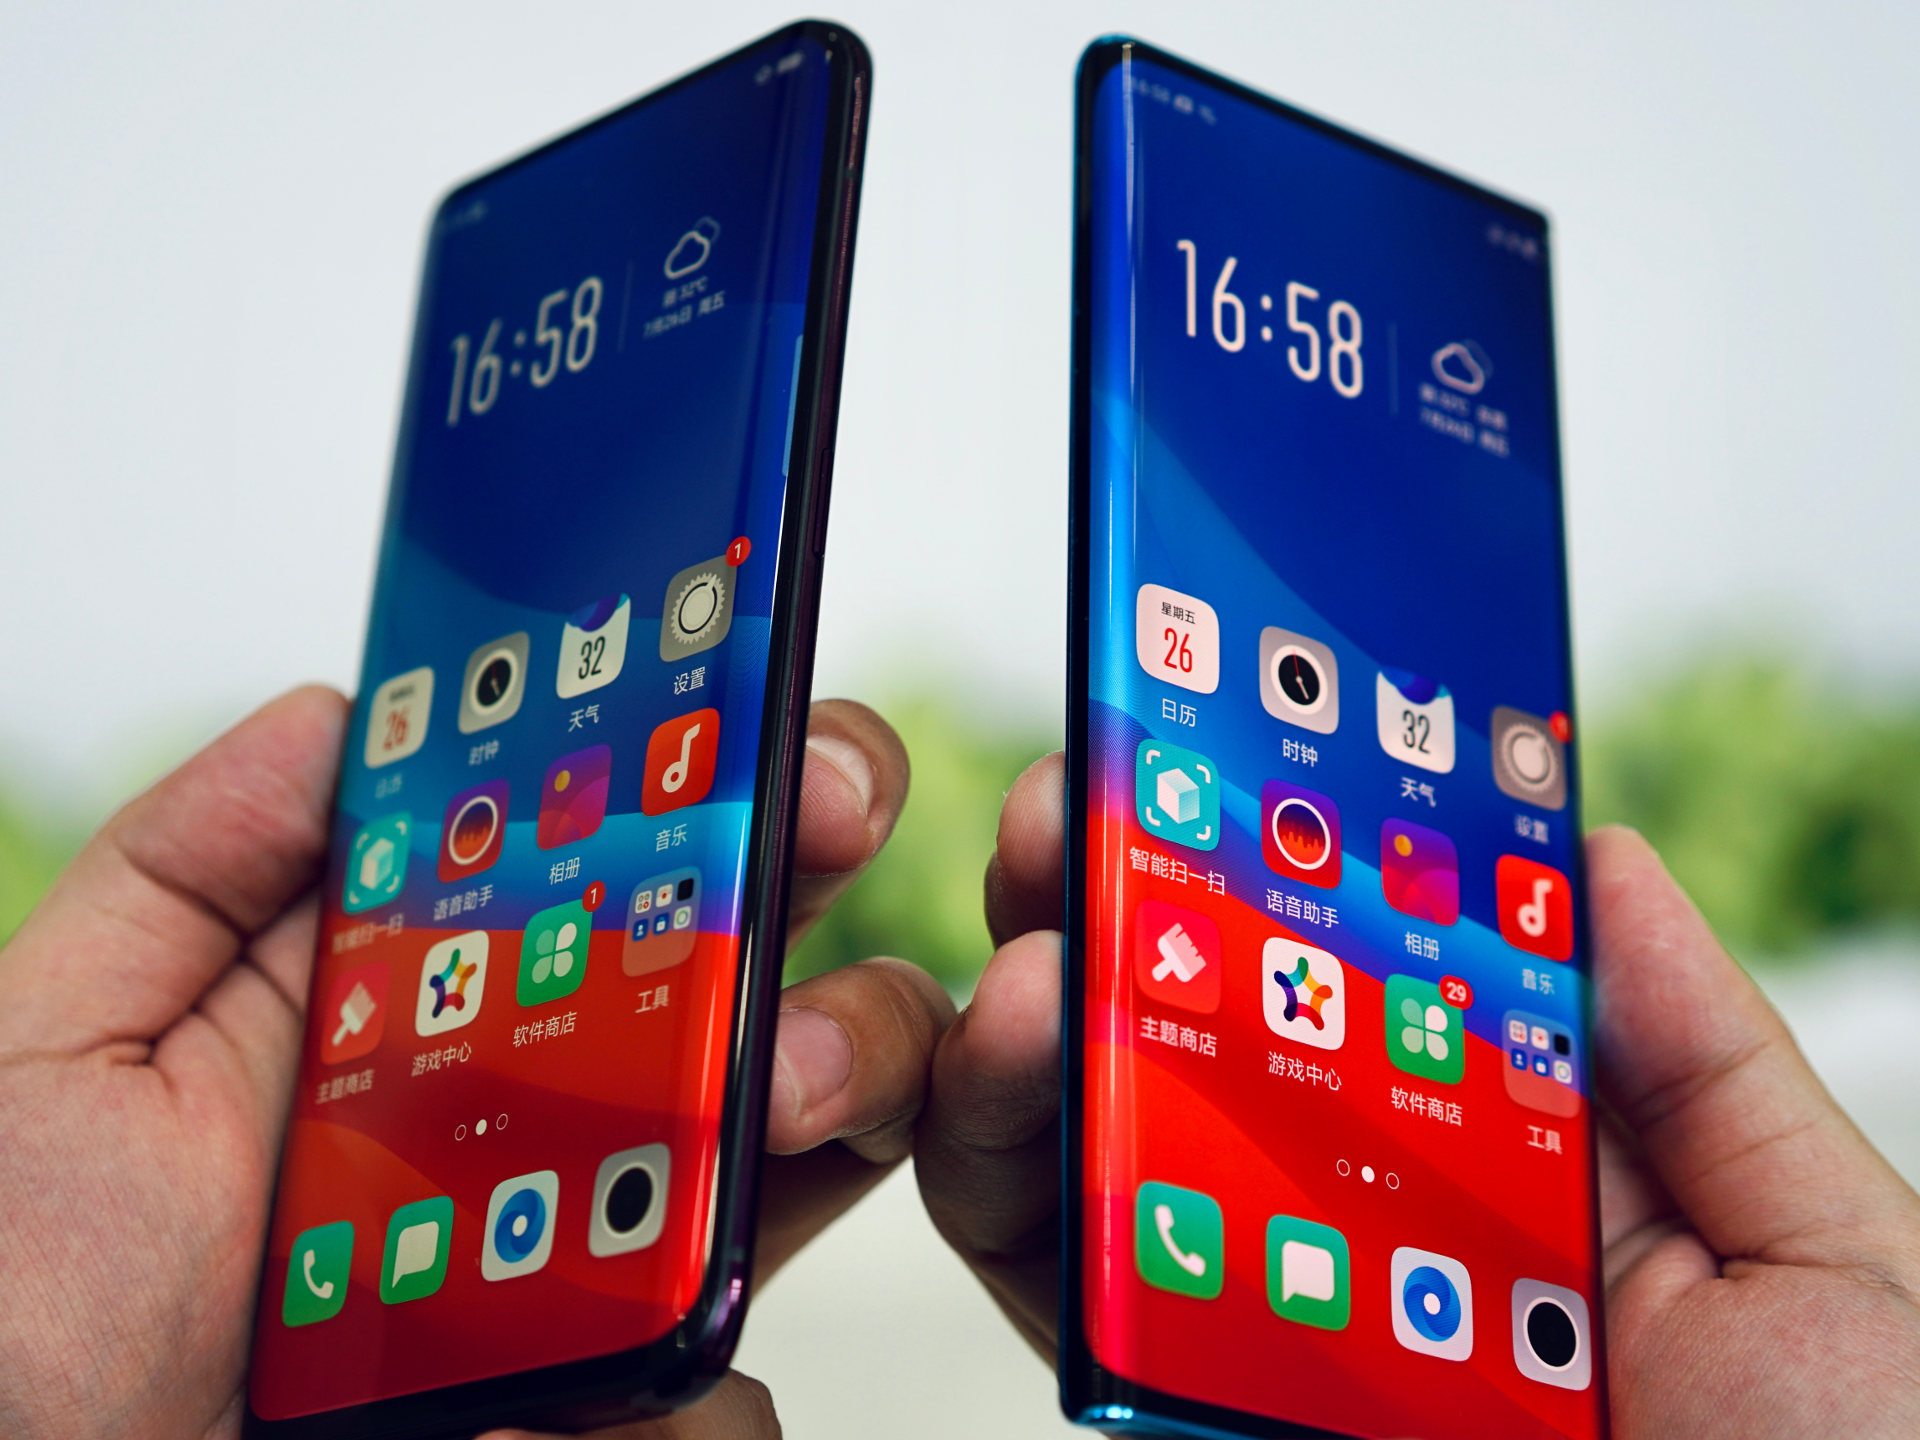 The OPPO Waterfall Screen phone compared to the Find X.